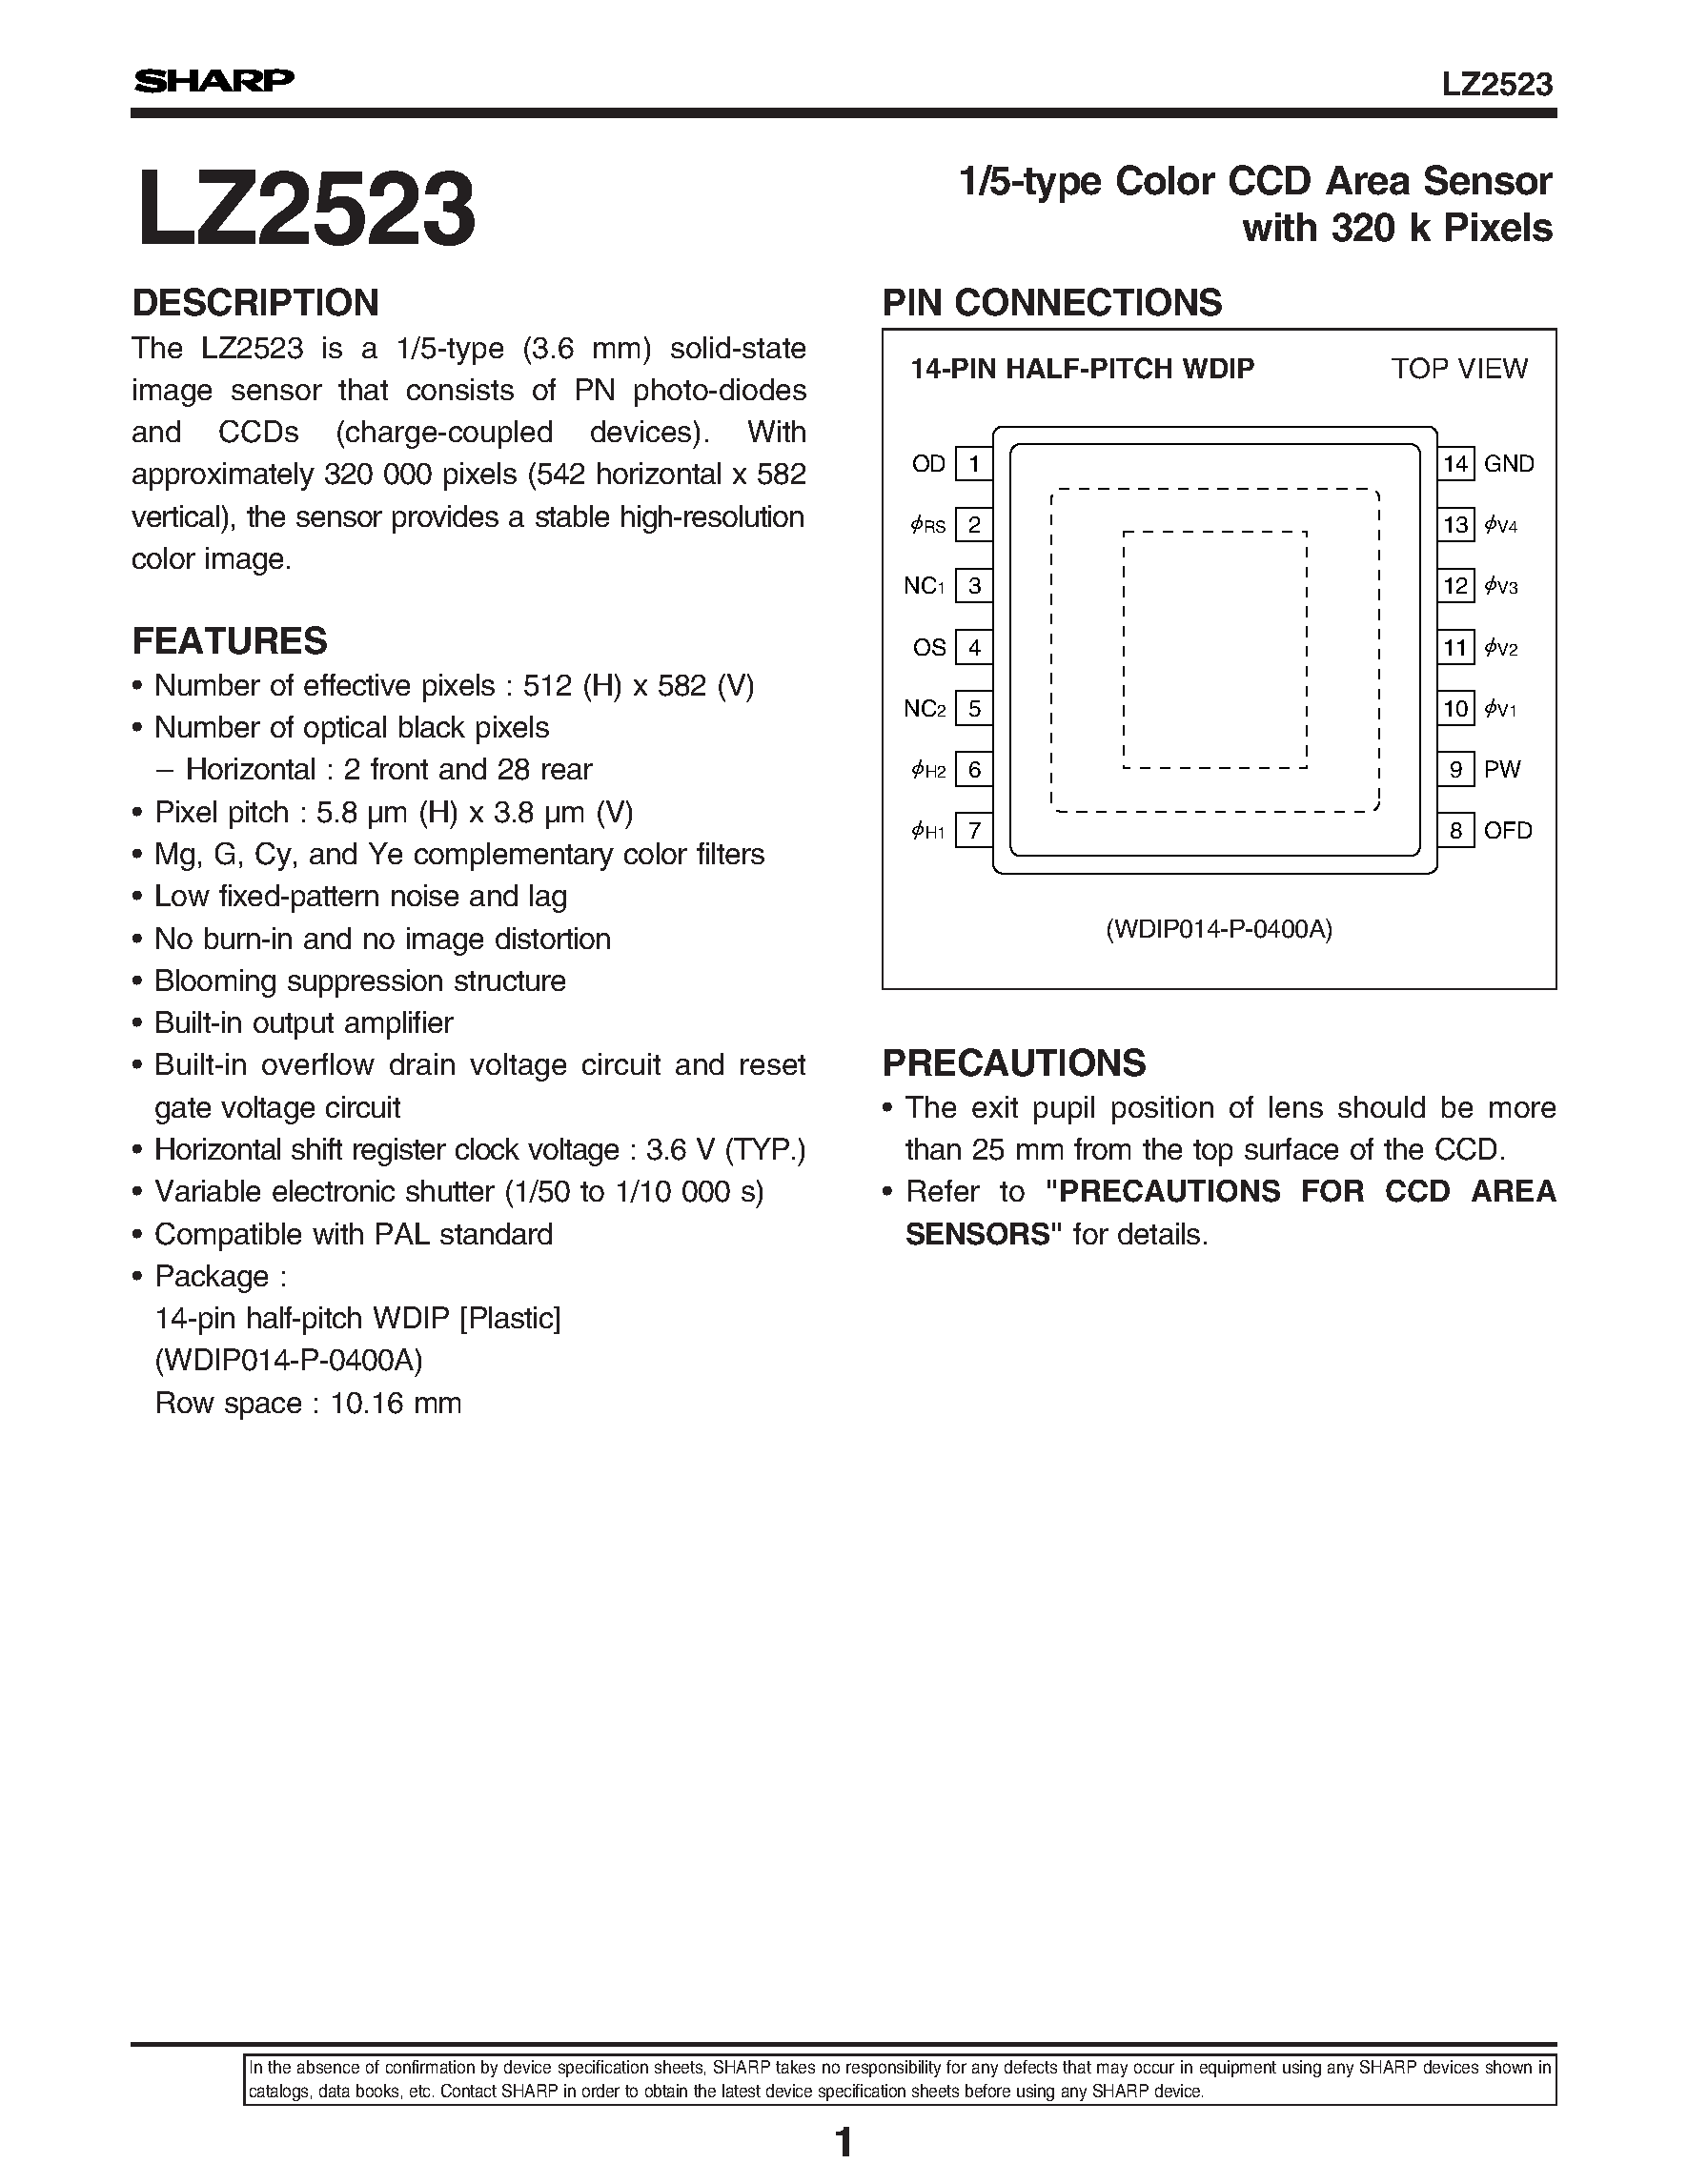 Datasheet LZ2523 - 1/5-type Color CCD Area Sensor with 320 k Pixels page 1